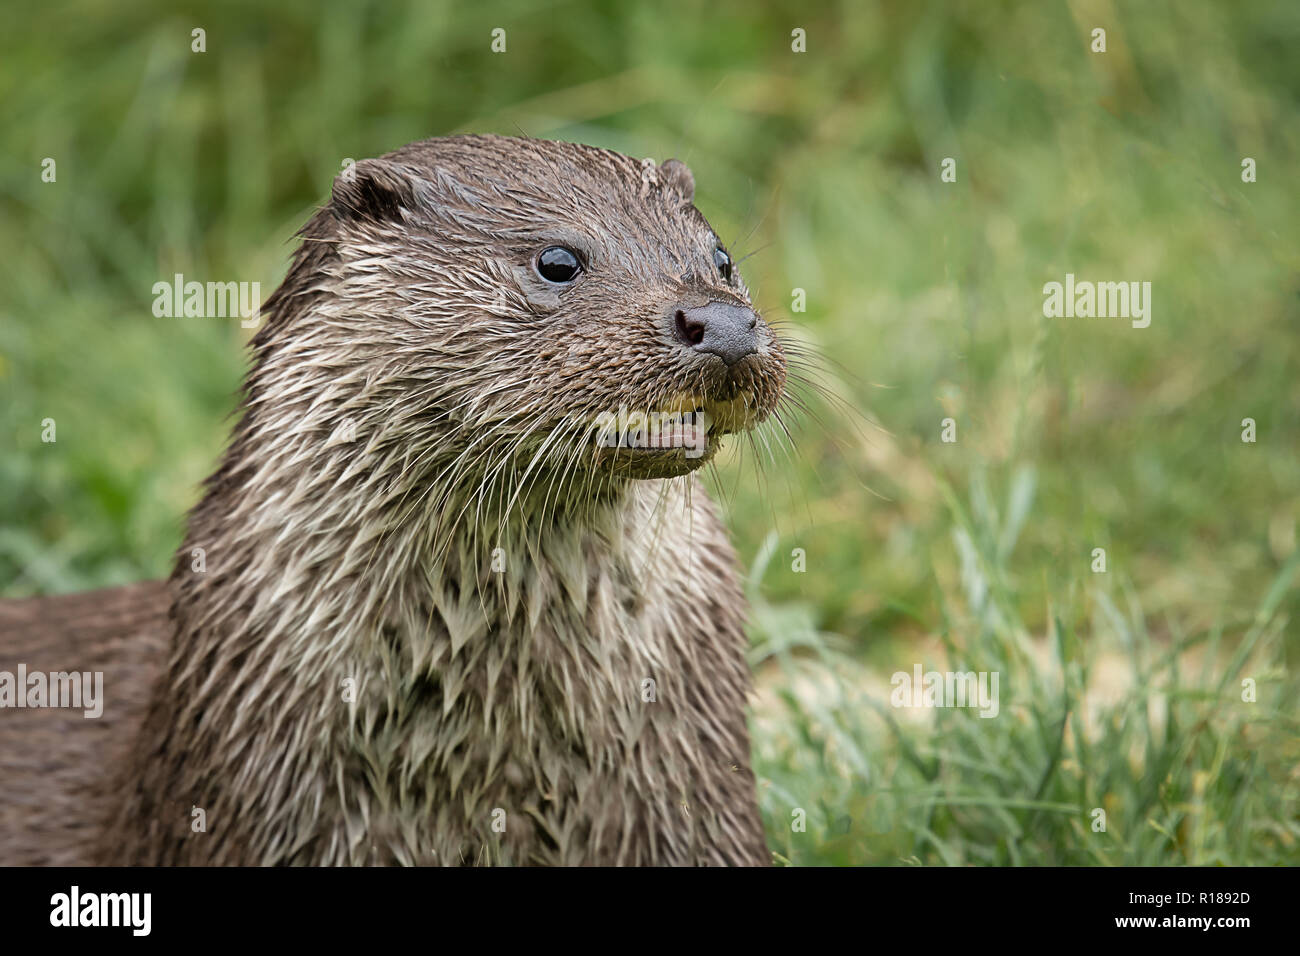 A close up portrait of the head and shoulders of an otter. It is lookingtyo the right of the image into open space Stock Photo